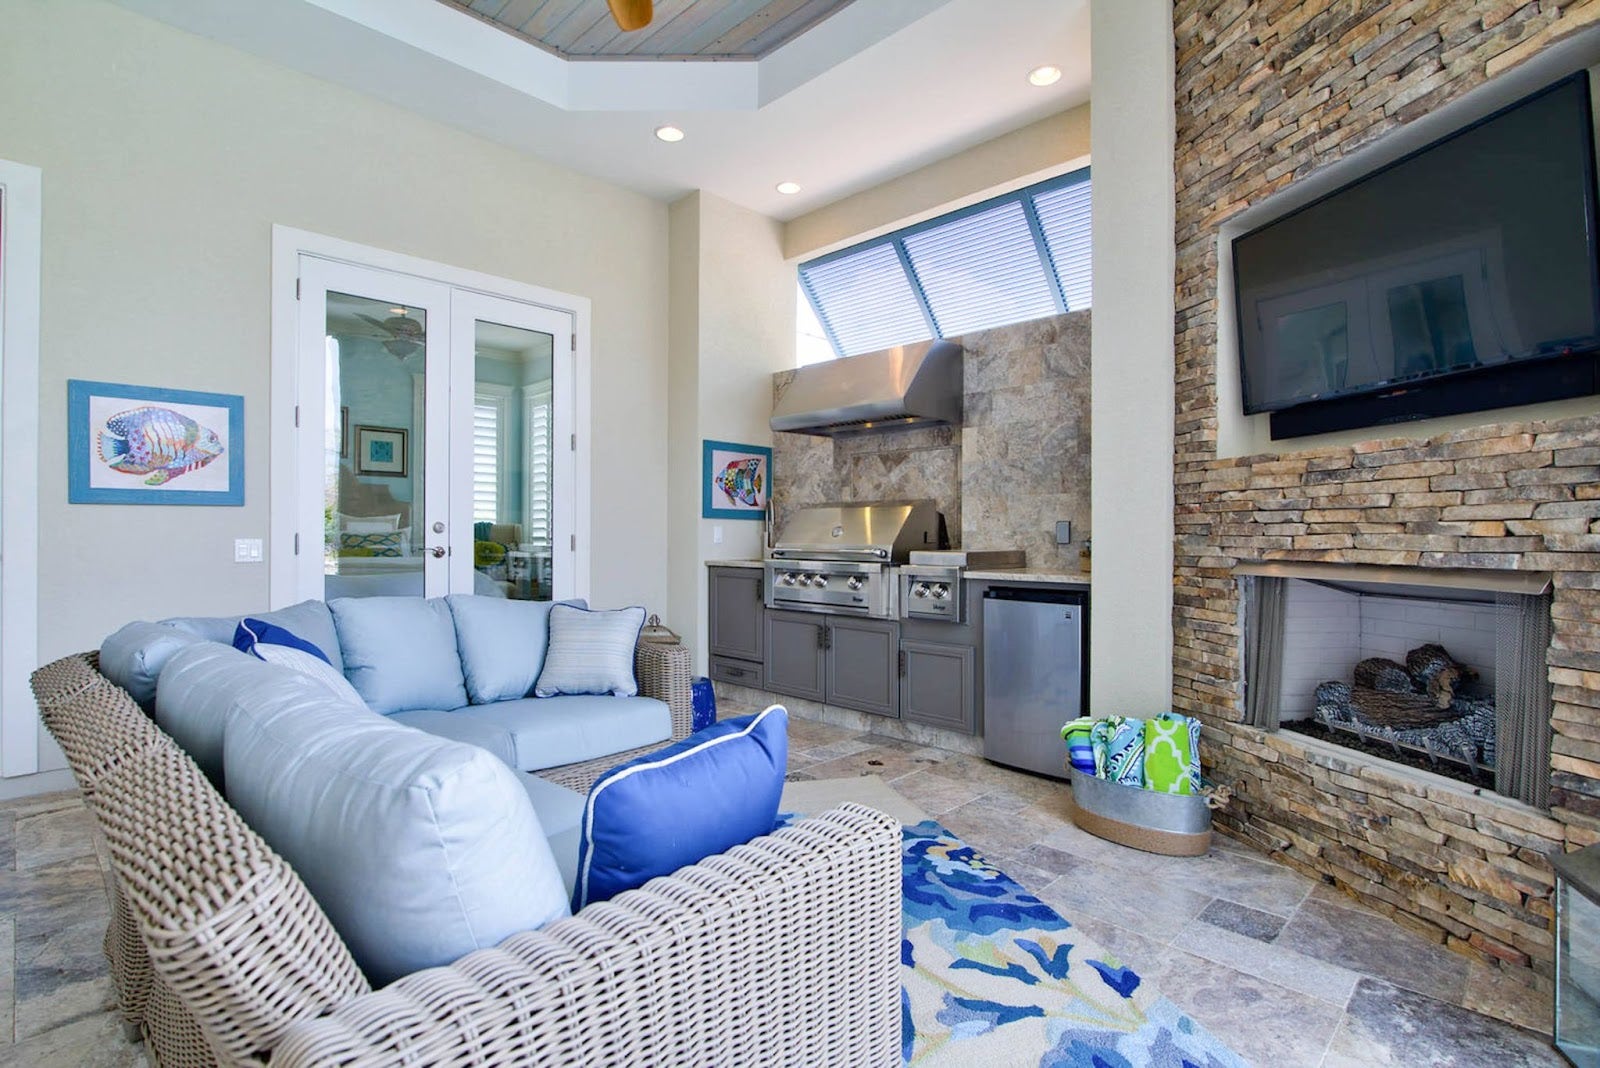 Open living room with plush blue sectional sofa, stone fireplace, gourmet kitchen featuring stainless steel appliances and bar seating, sliding glass doors to outdoor space, and seaside decor accents. - prolinerangehoods.com